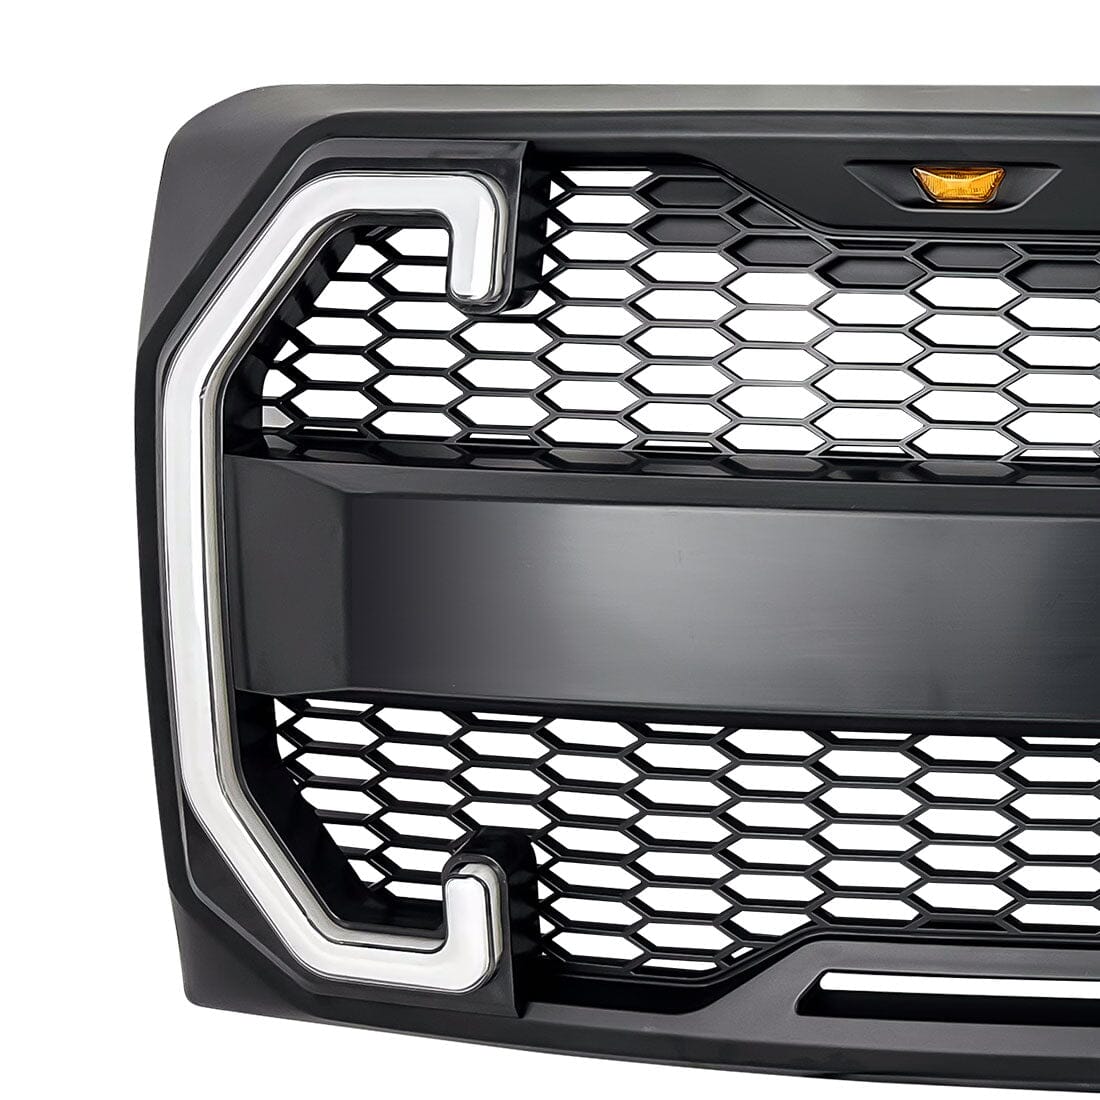 Raptor Style Mesh Grille W/DRL & Turn Signal Lights For 2009-2014 Ford F150 - Matte Black |  In stock on Dec 20